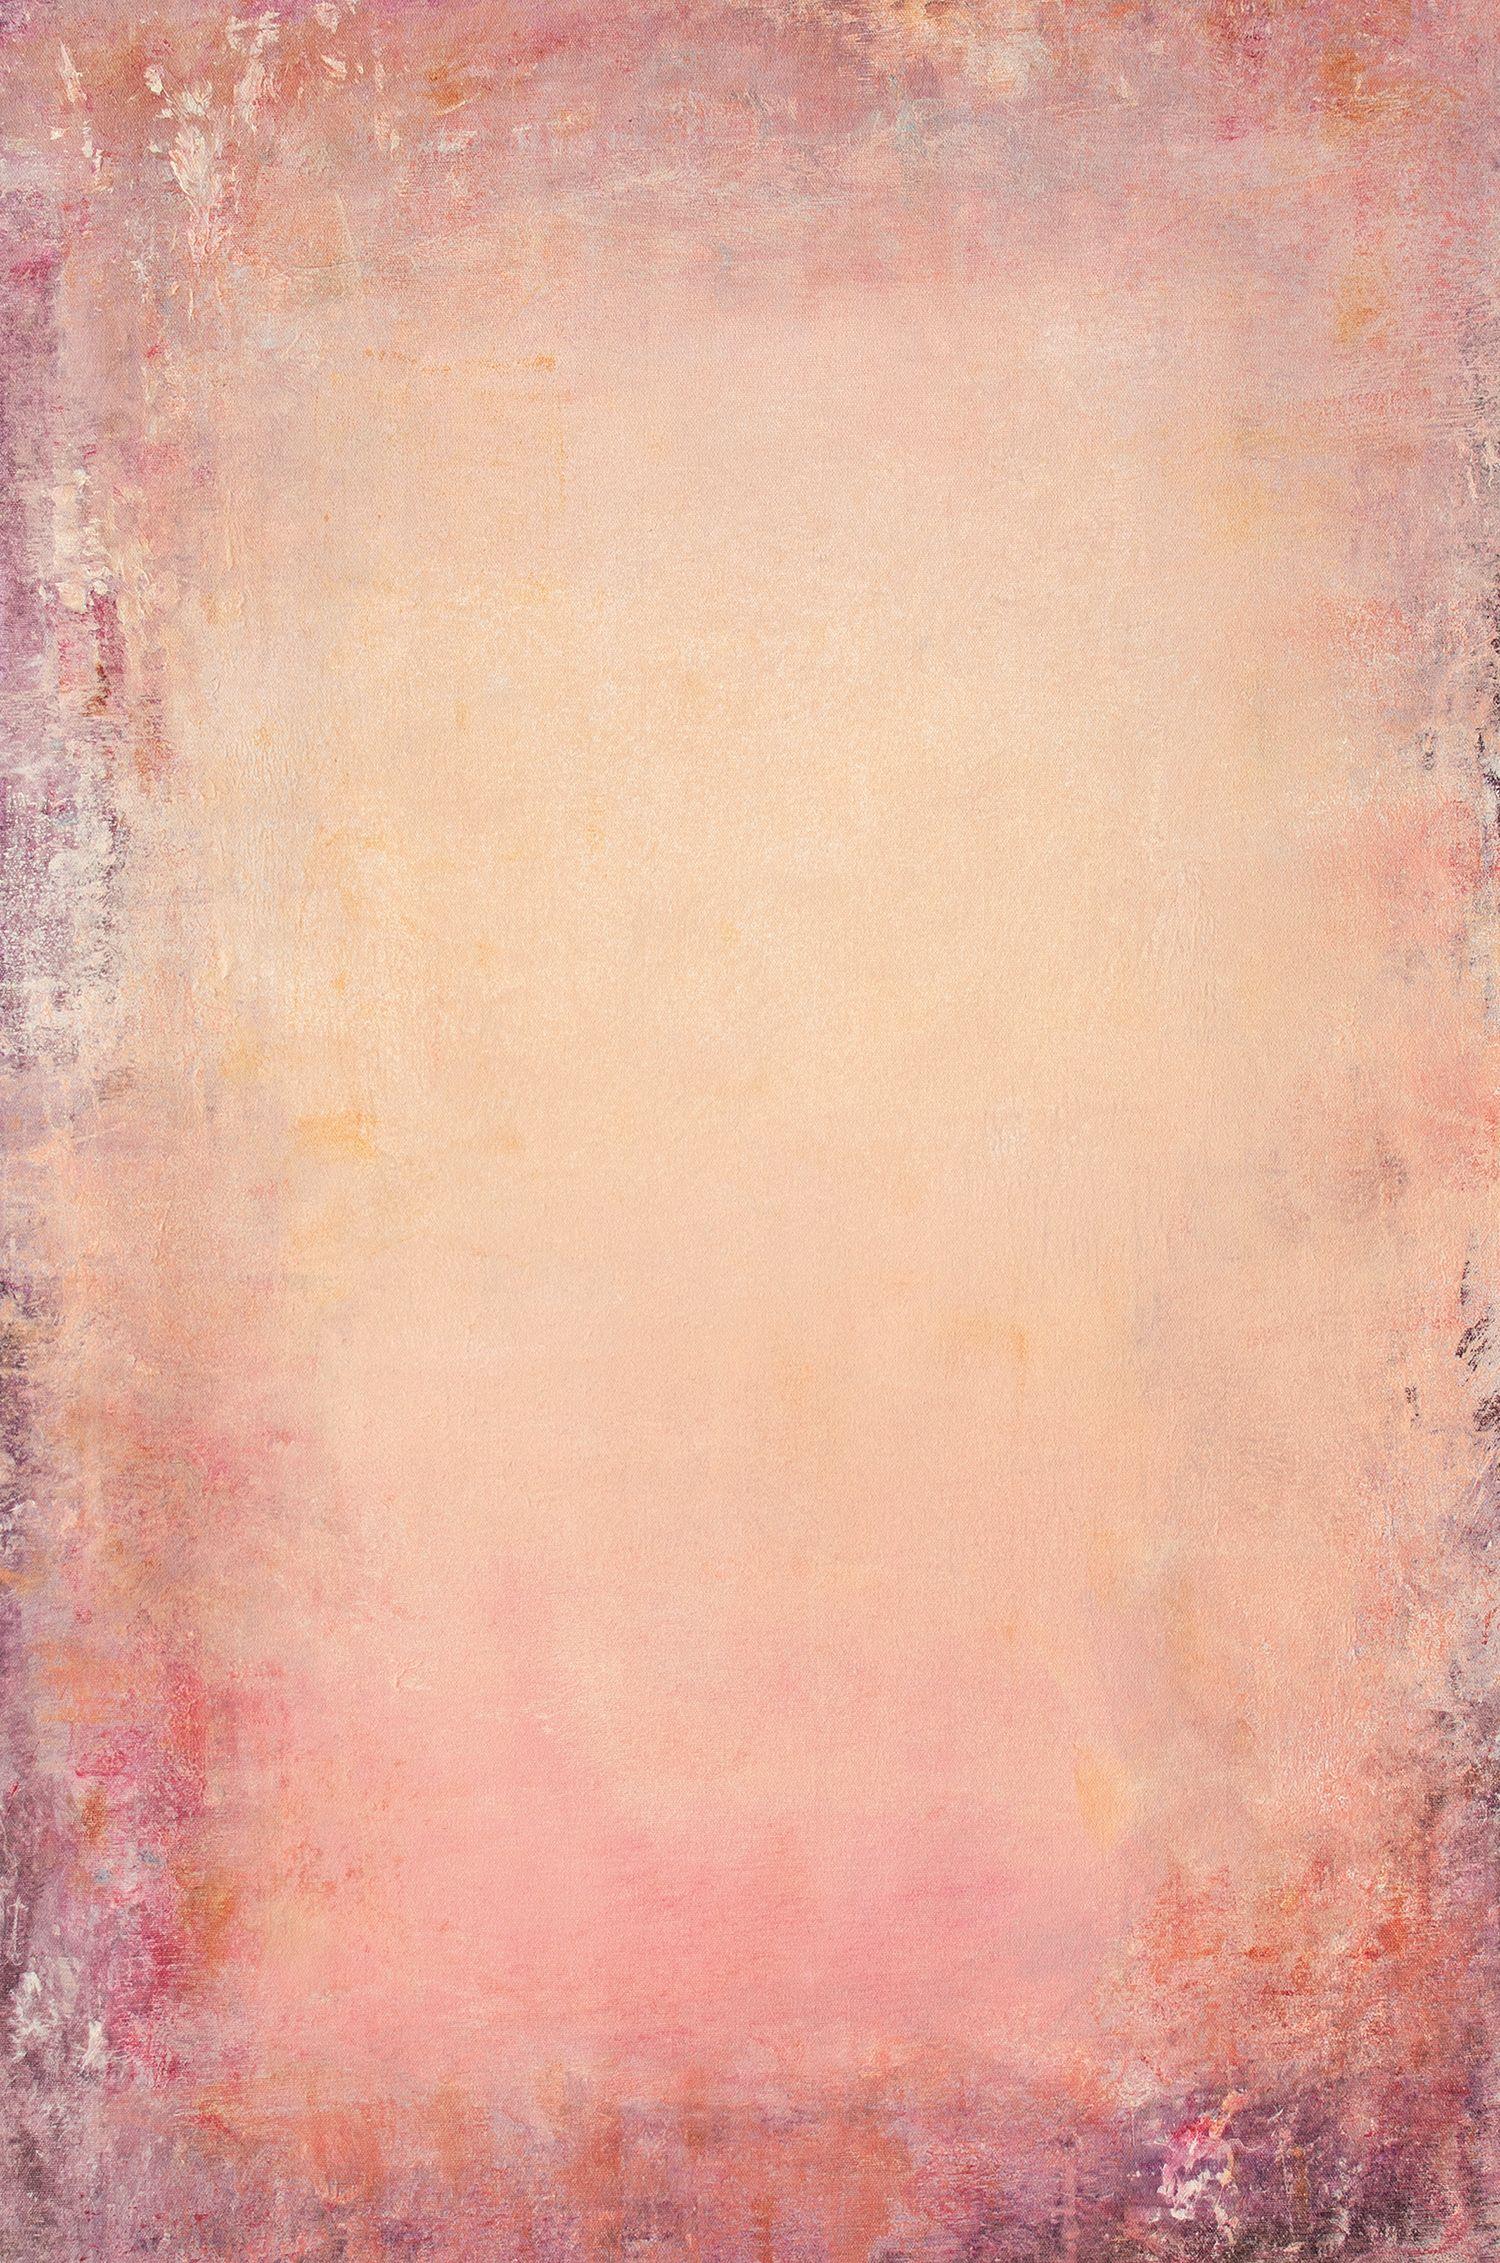 Don Bishop Abstract Painting - Pink And Peach 211103, Painting, Acrylic on Canvas